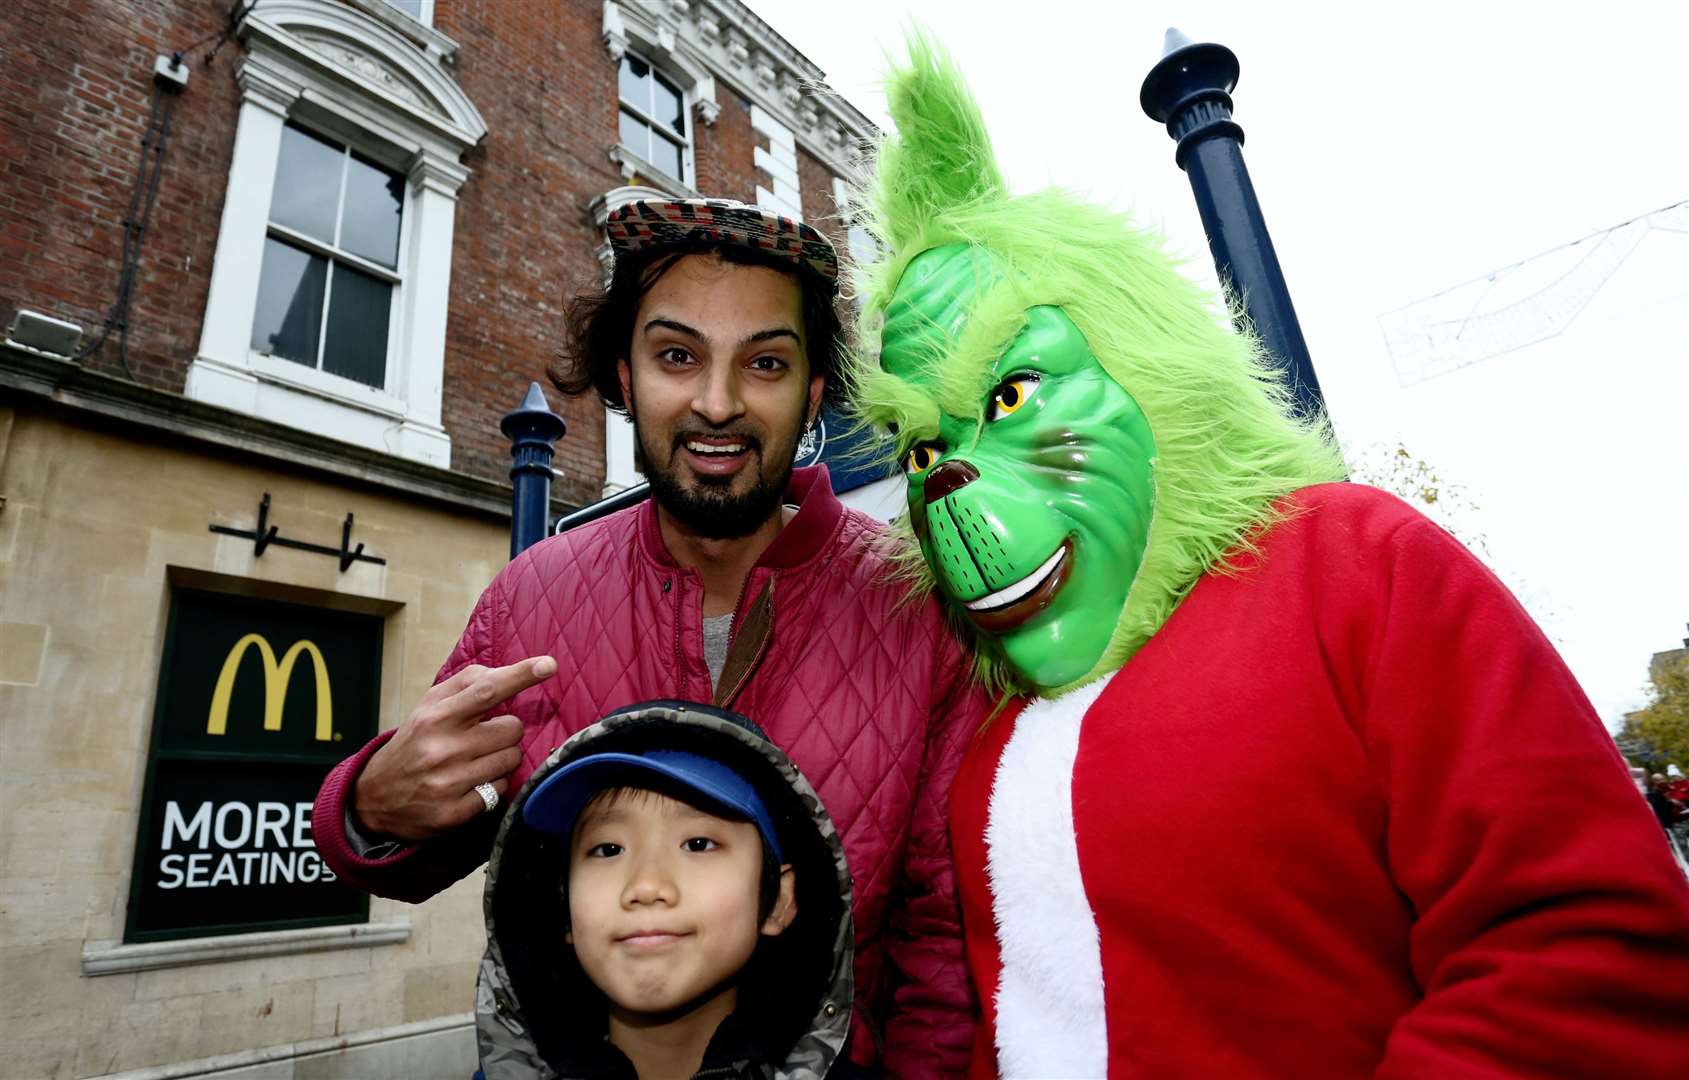 The Grinch even made an appearance. Picture: Gravesham Borough Council